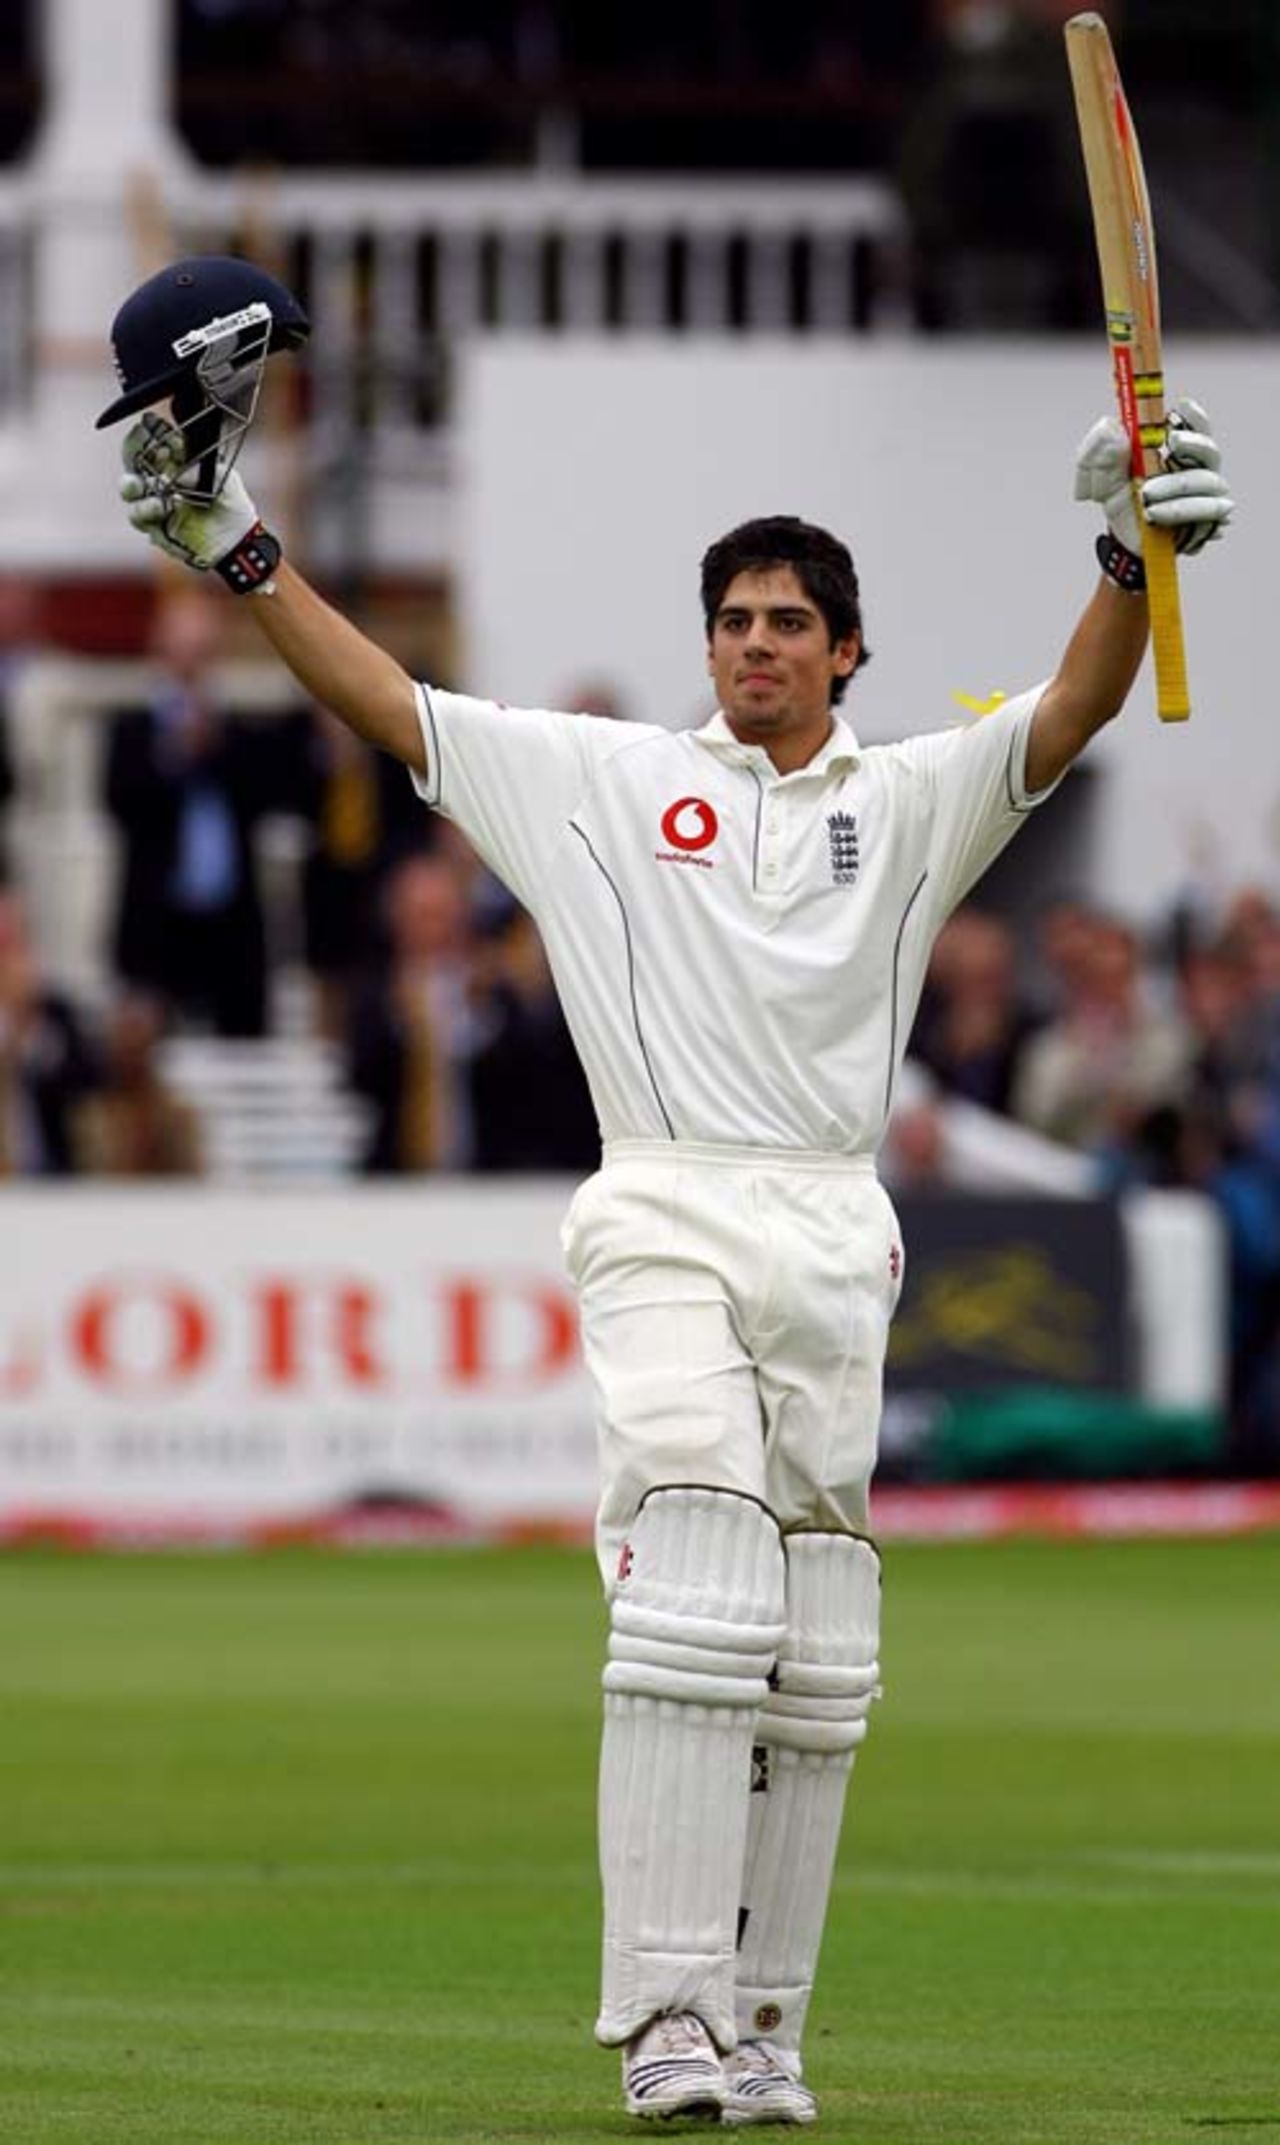 Alastair Cook celebrates reaching his fifth Test hundred, England v West Indies, 1st Test, Lord's, May 17, 2007